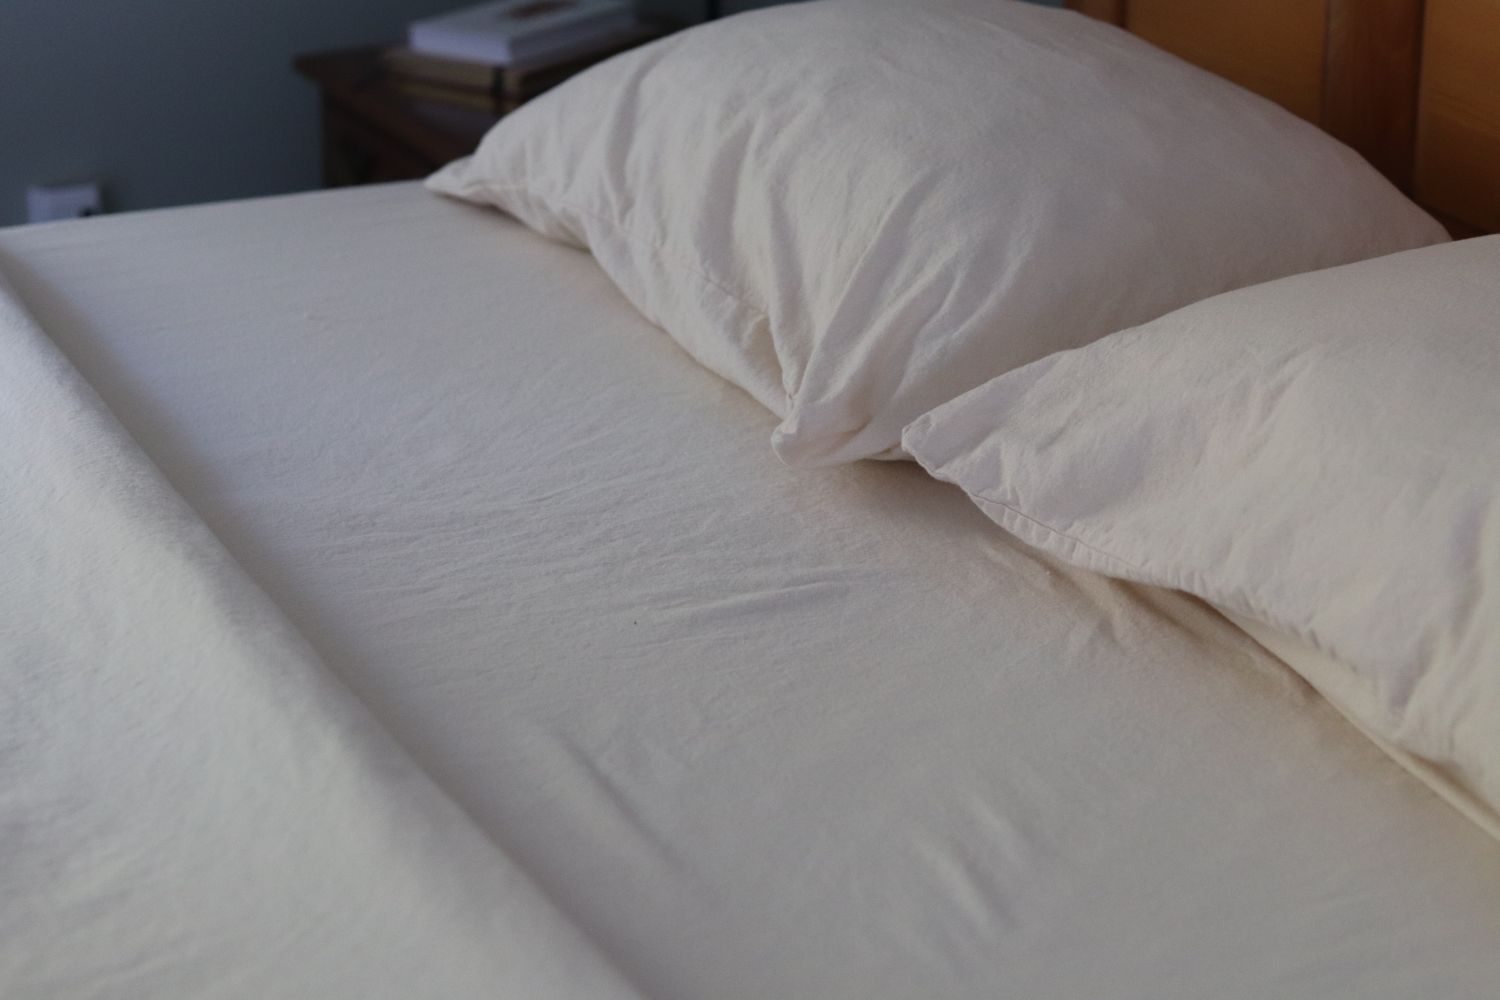 The Best Flannel Sheets folded back on a bed before being slept on for testing.